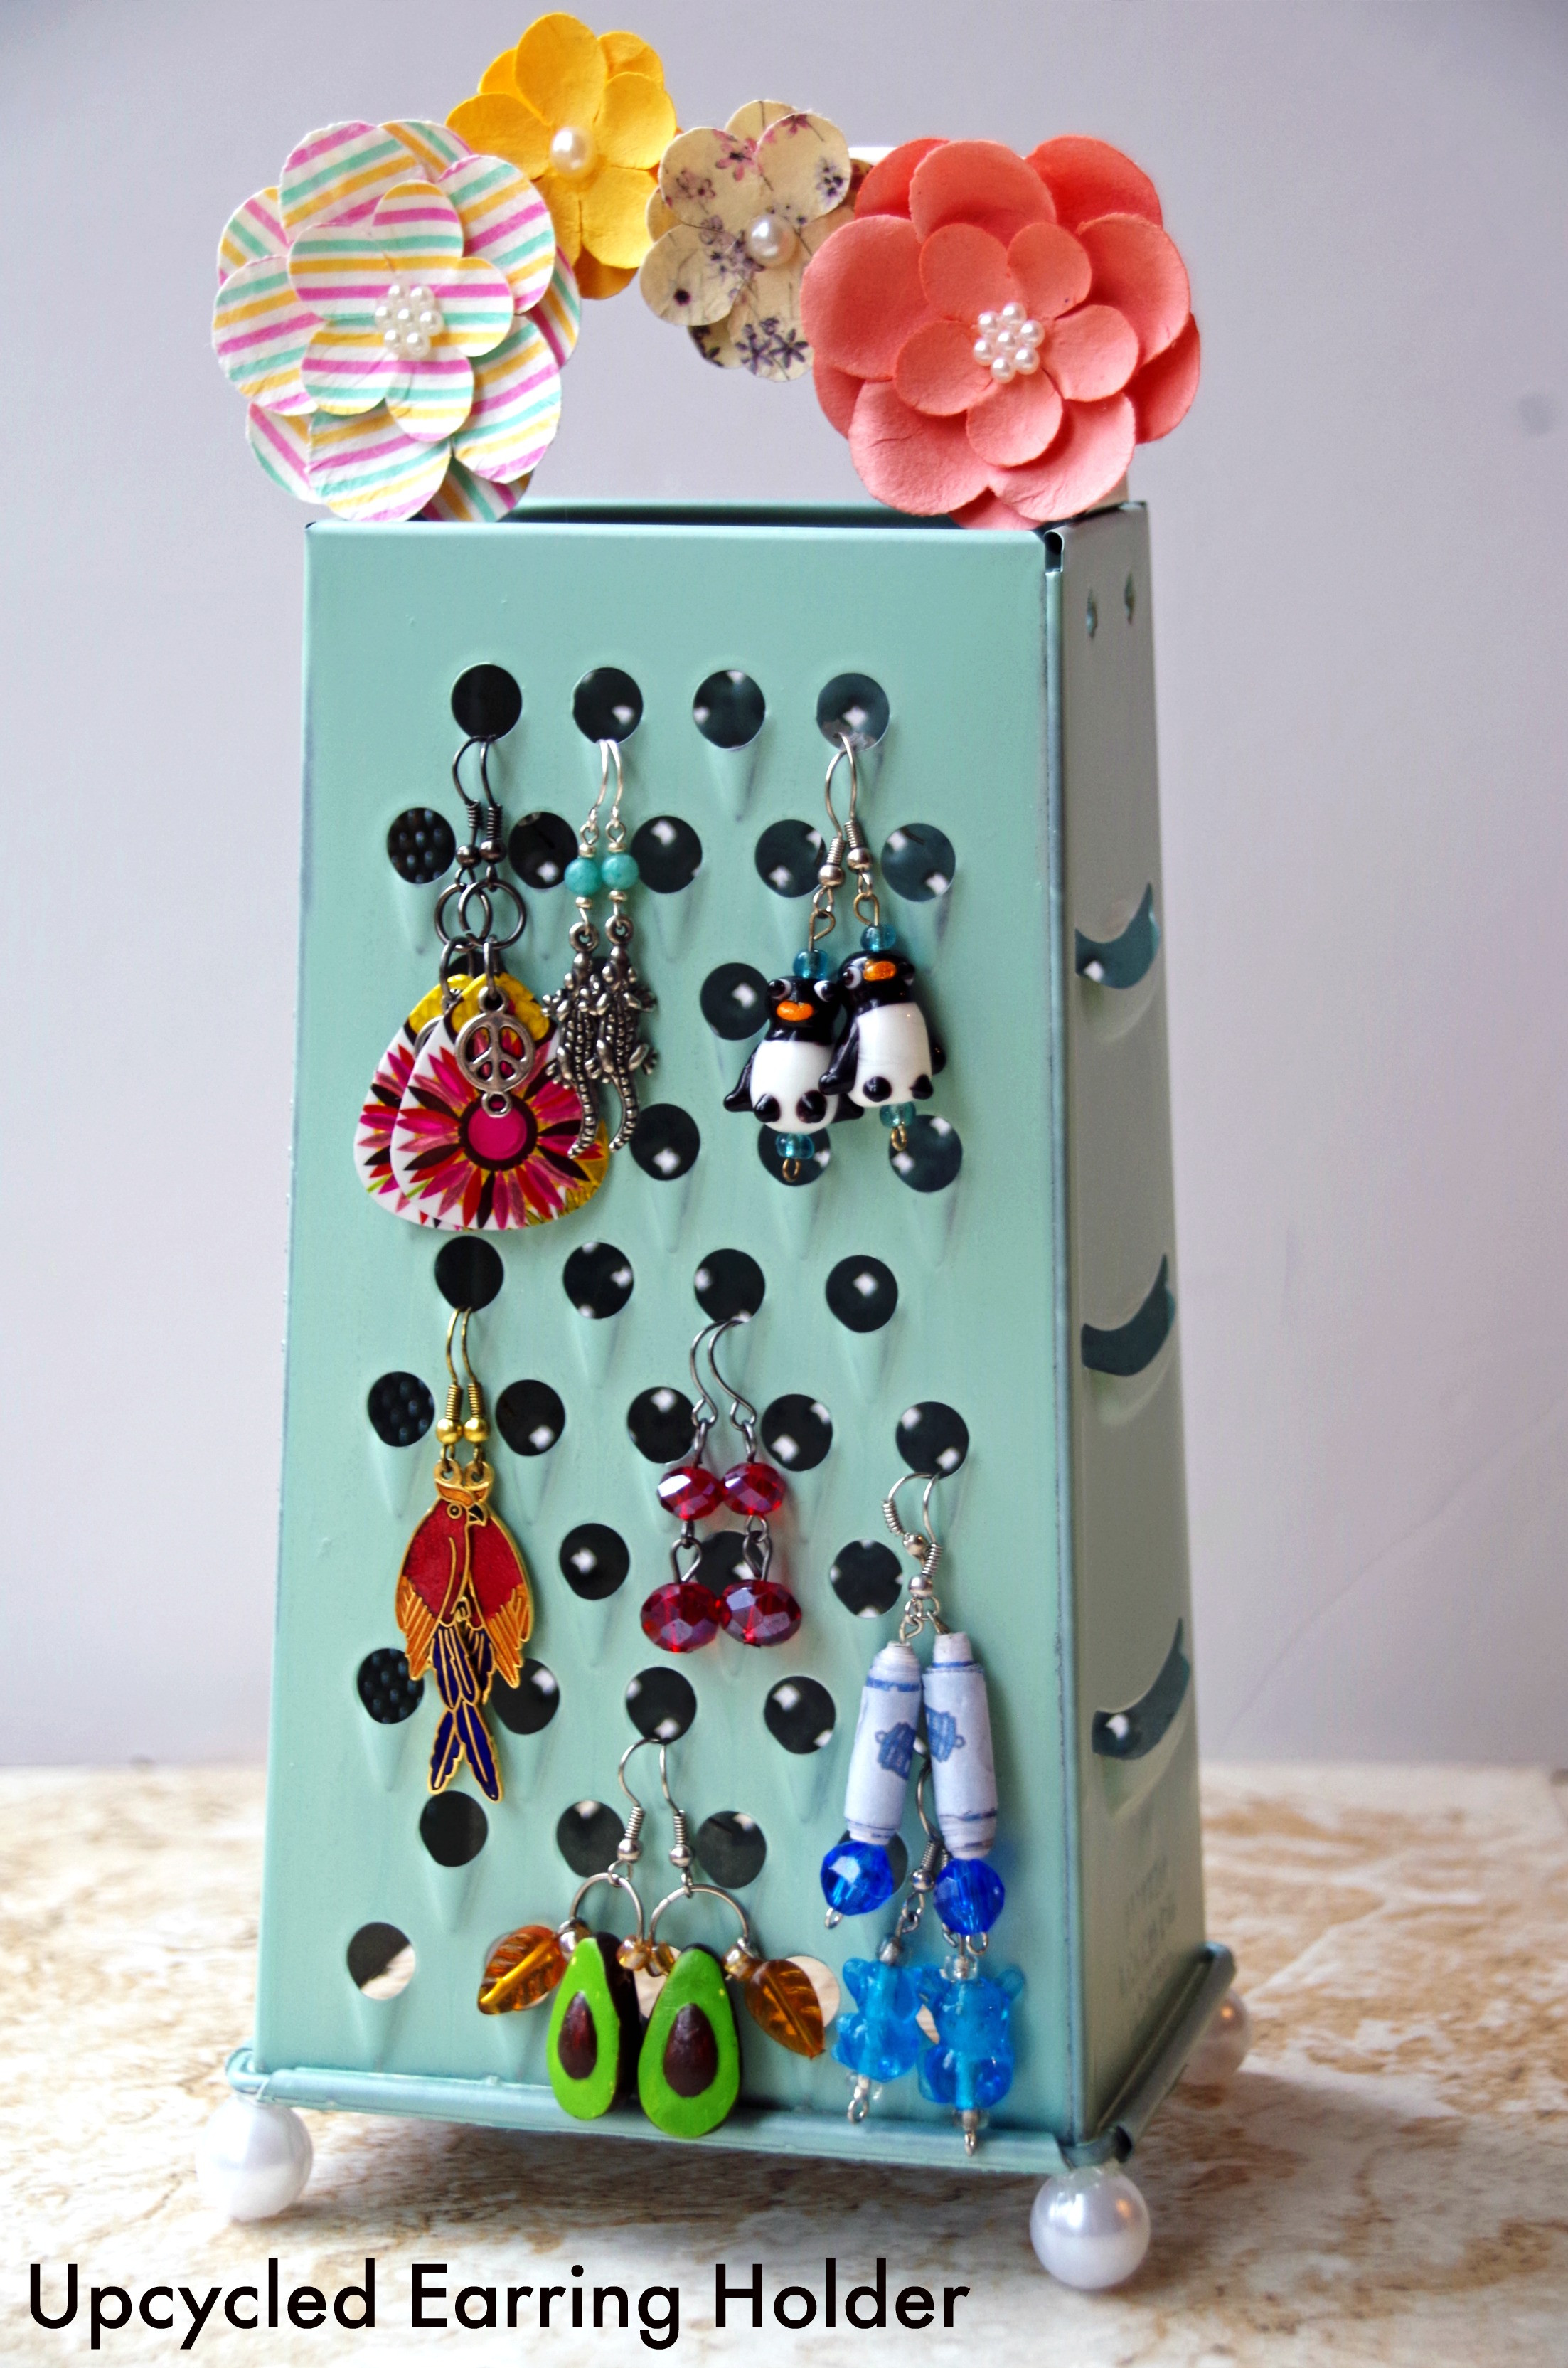 Easy Home Crafts
 Homemade Earring Holder from an Upcycled Cheese Grater